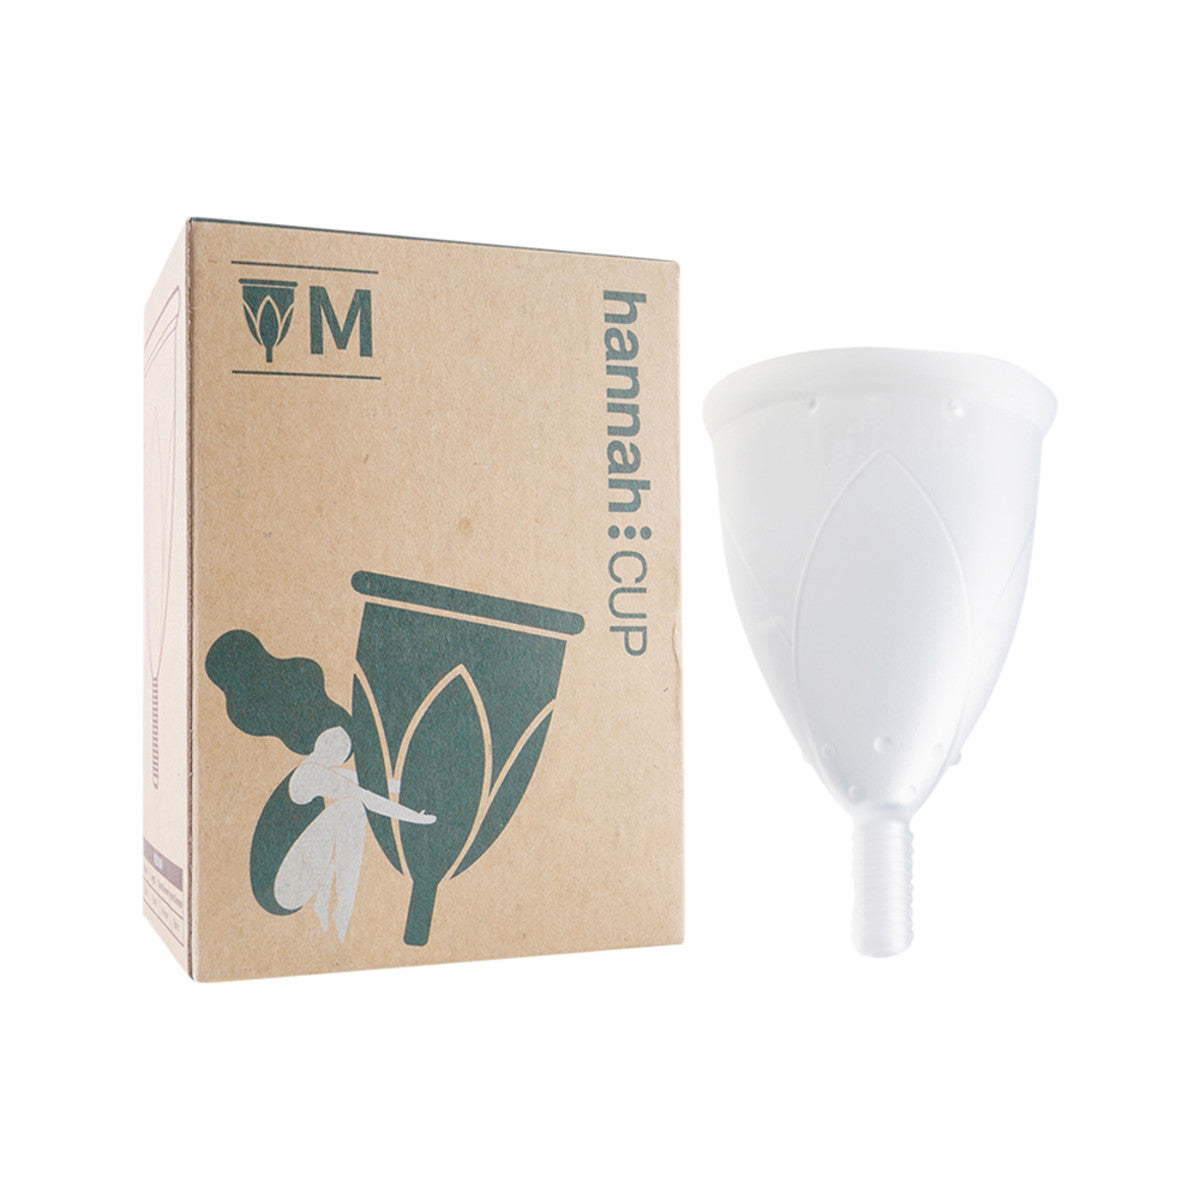 Hannah Cup Menstrual Cup, Small Or Medium Size